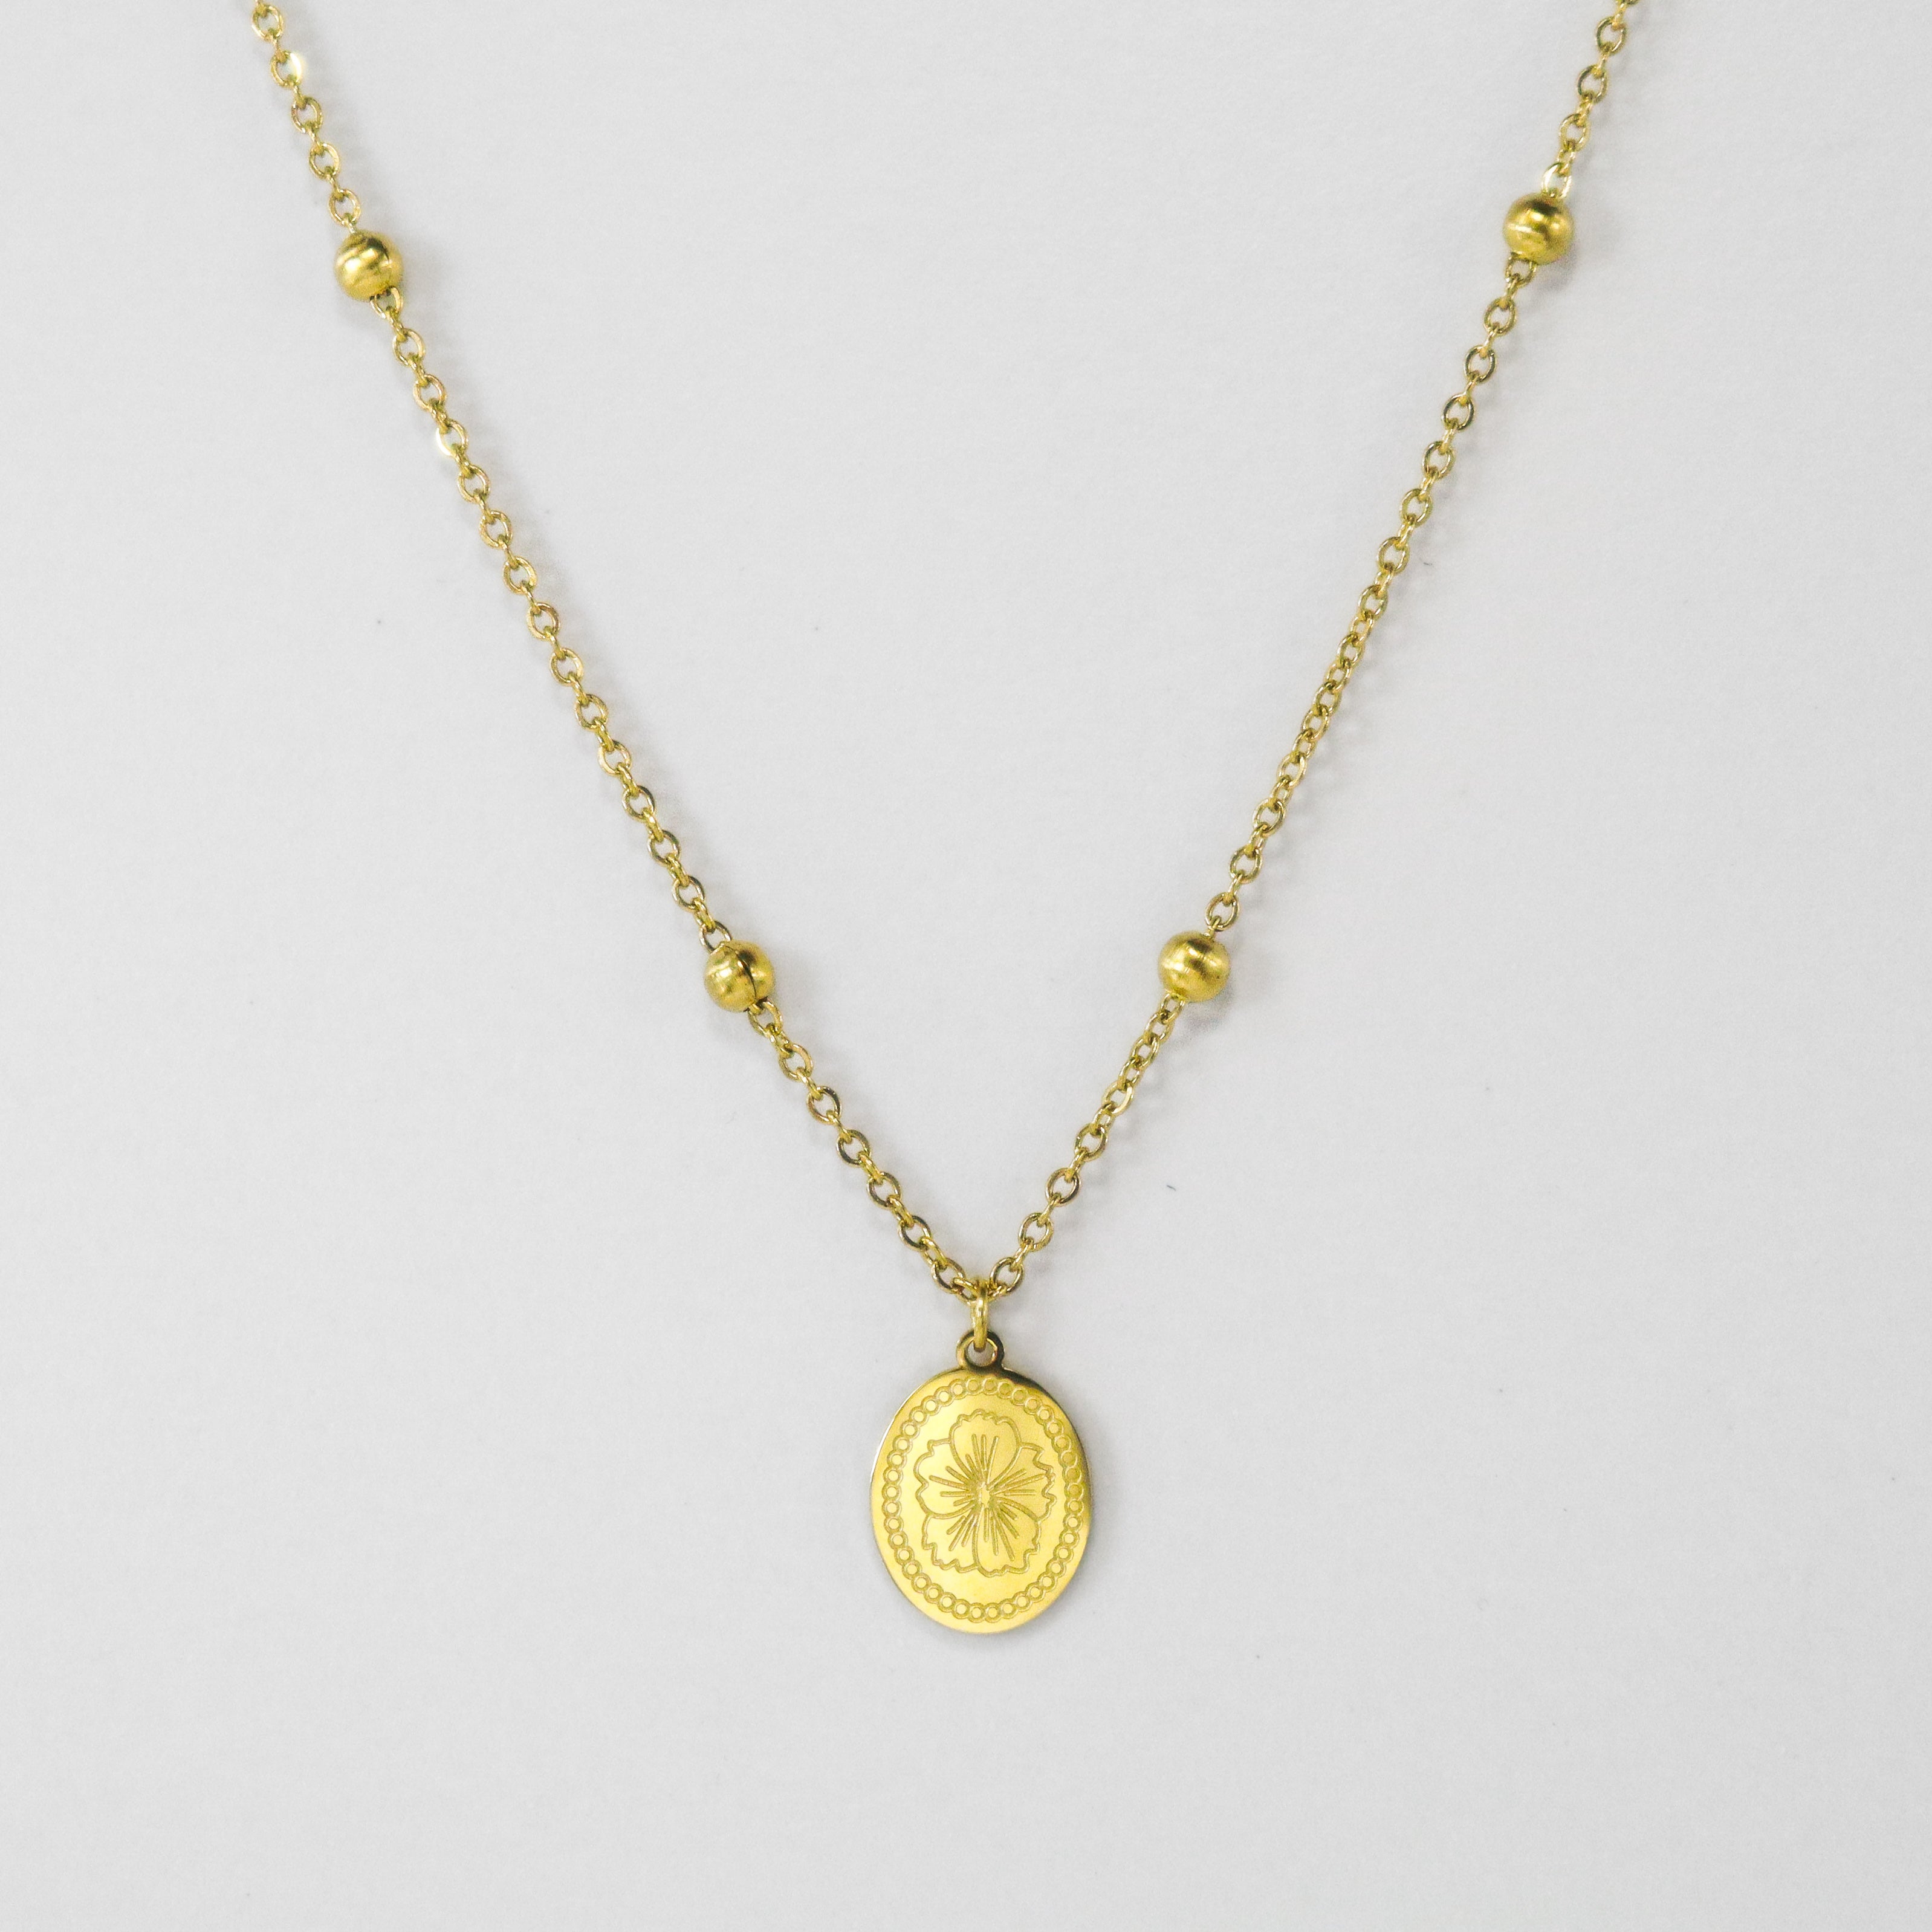 O’ahu Hibiscus Gold Necklace